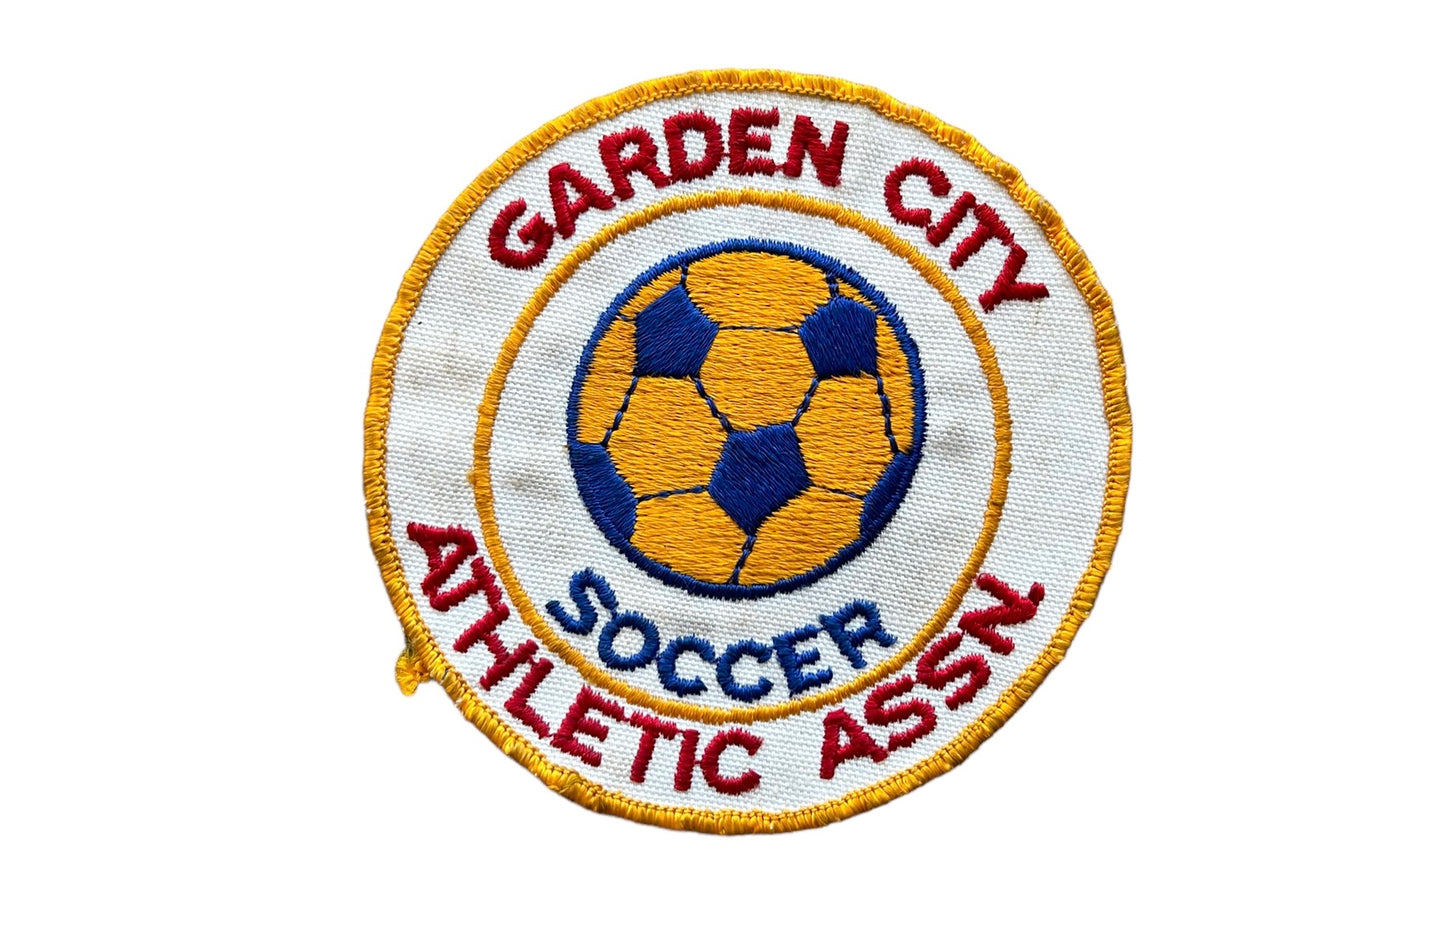 Vintage Soccer Patches